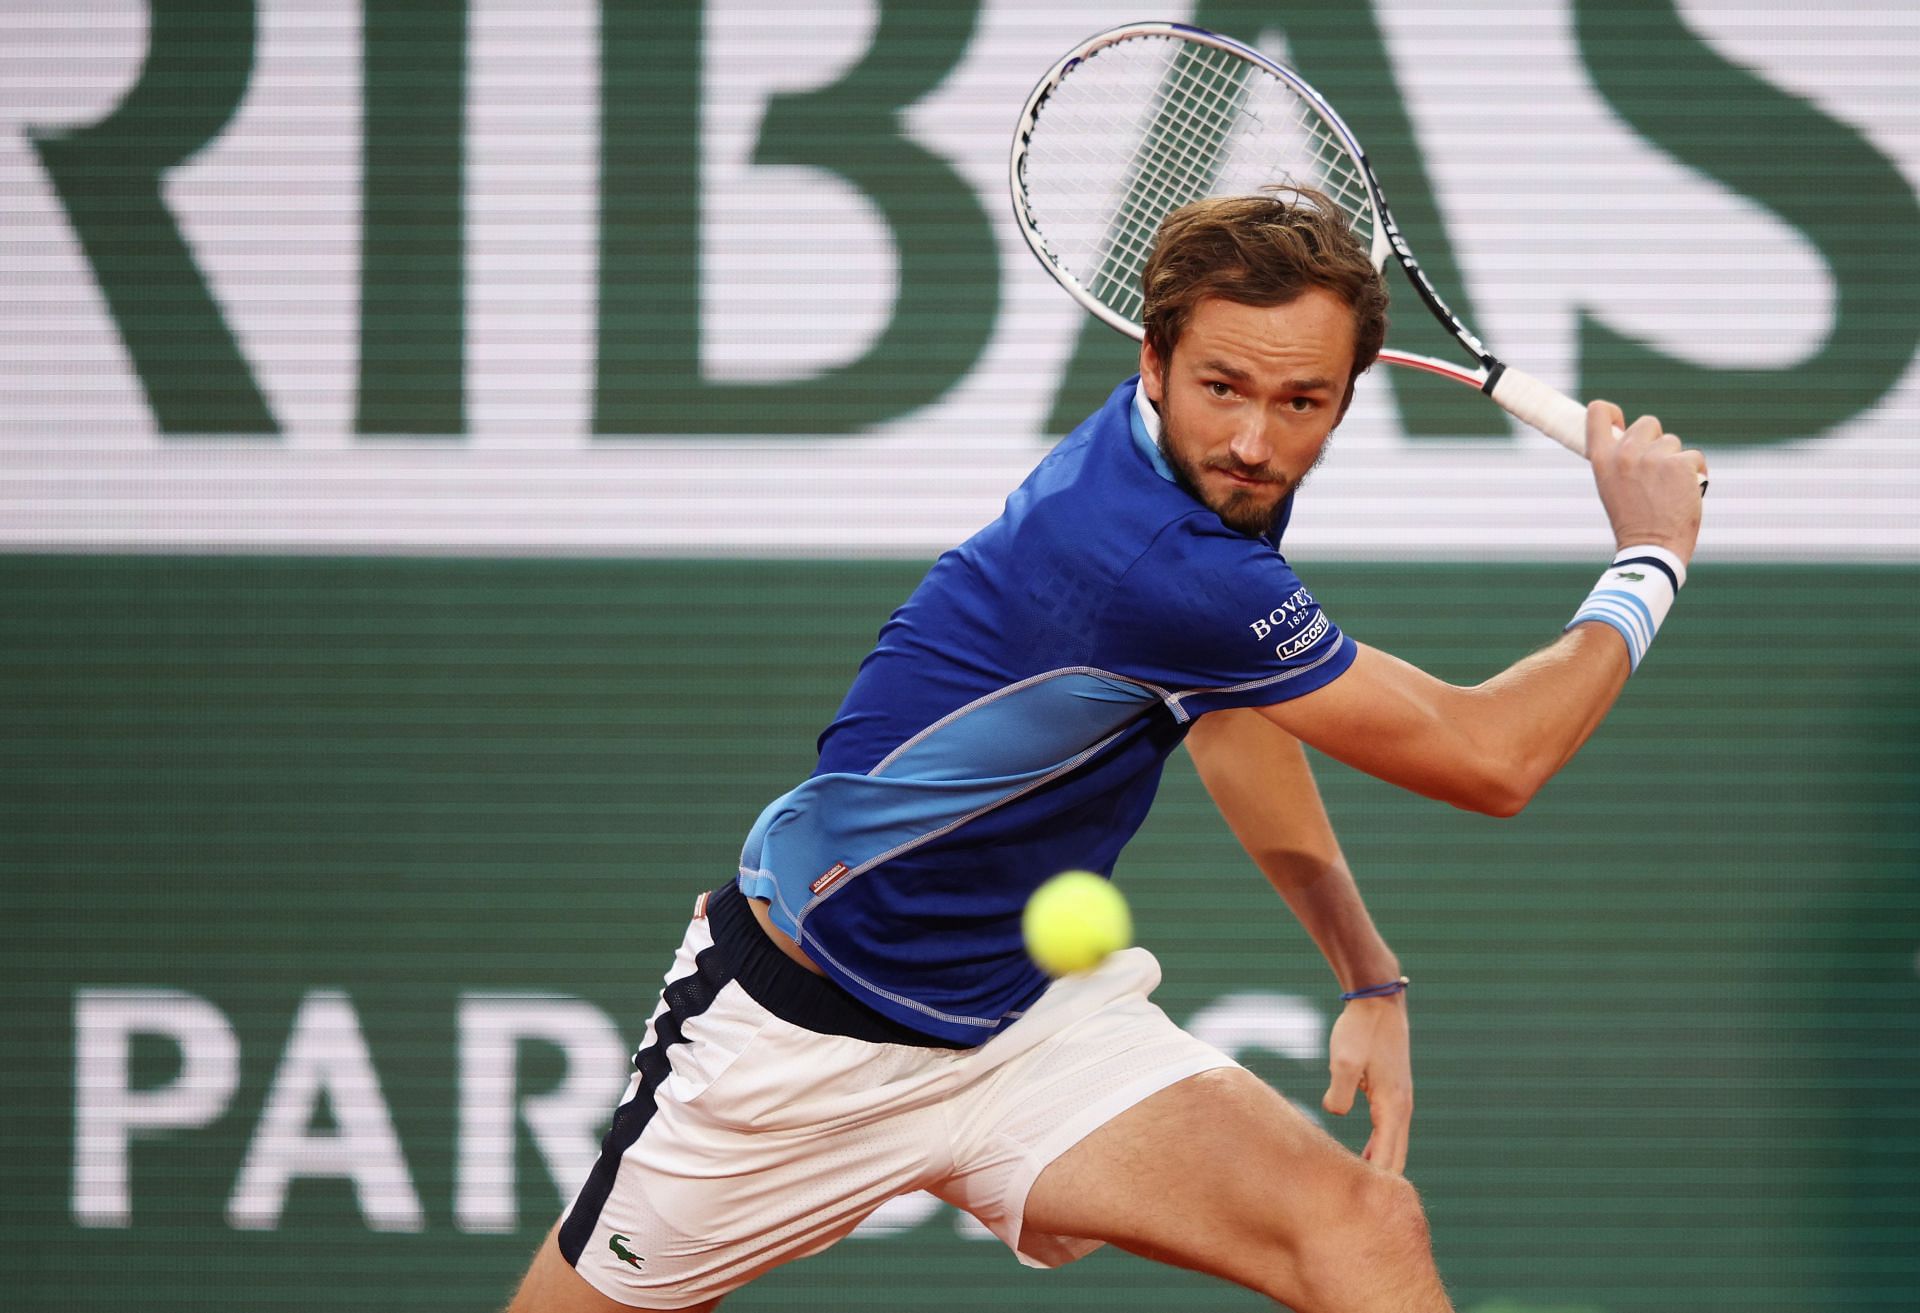 Daniil Medvedev is the top seed at the Halle Open